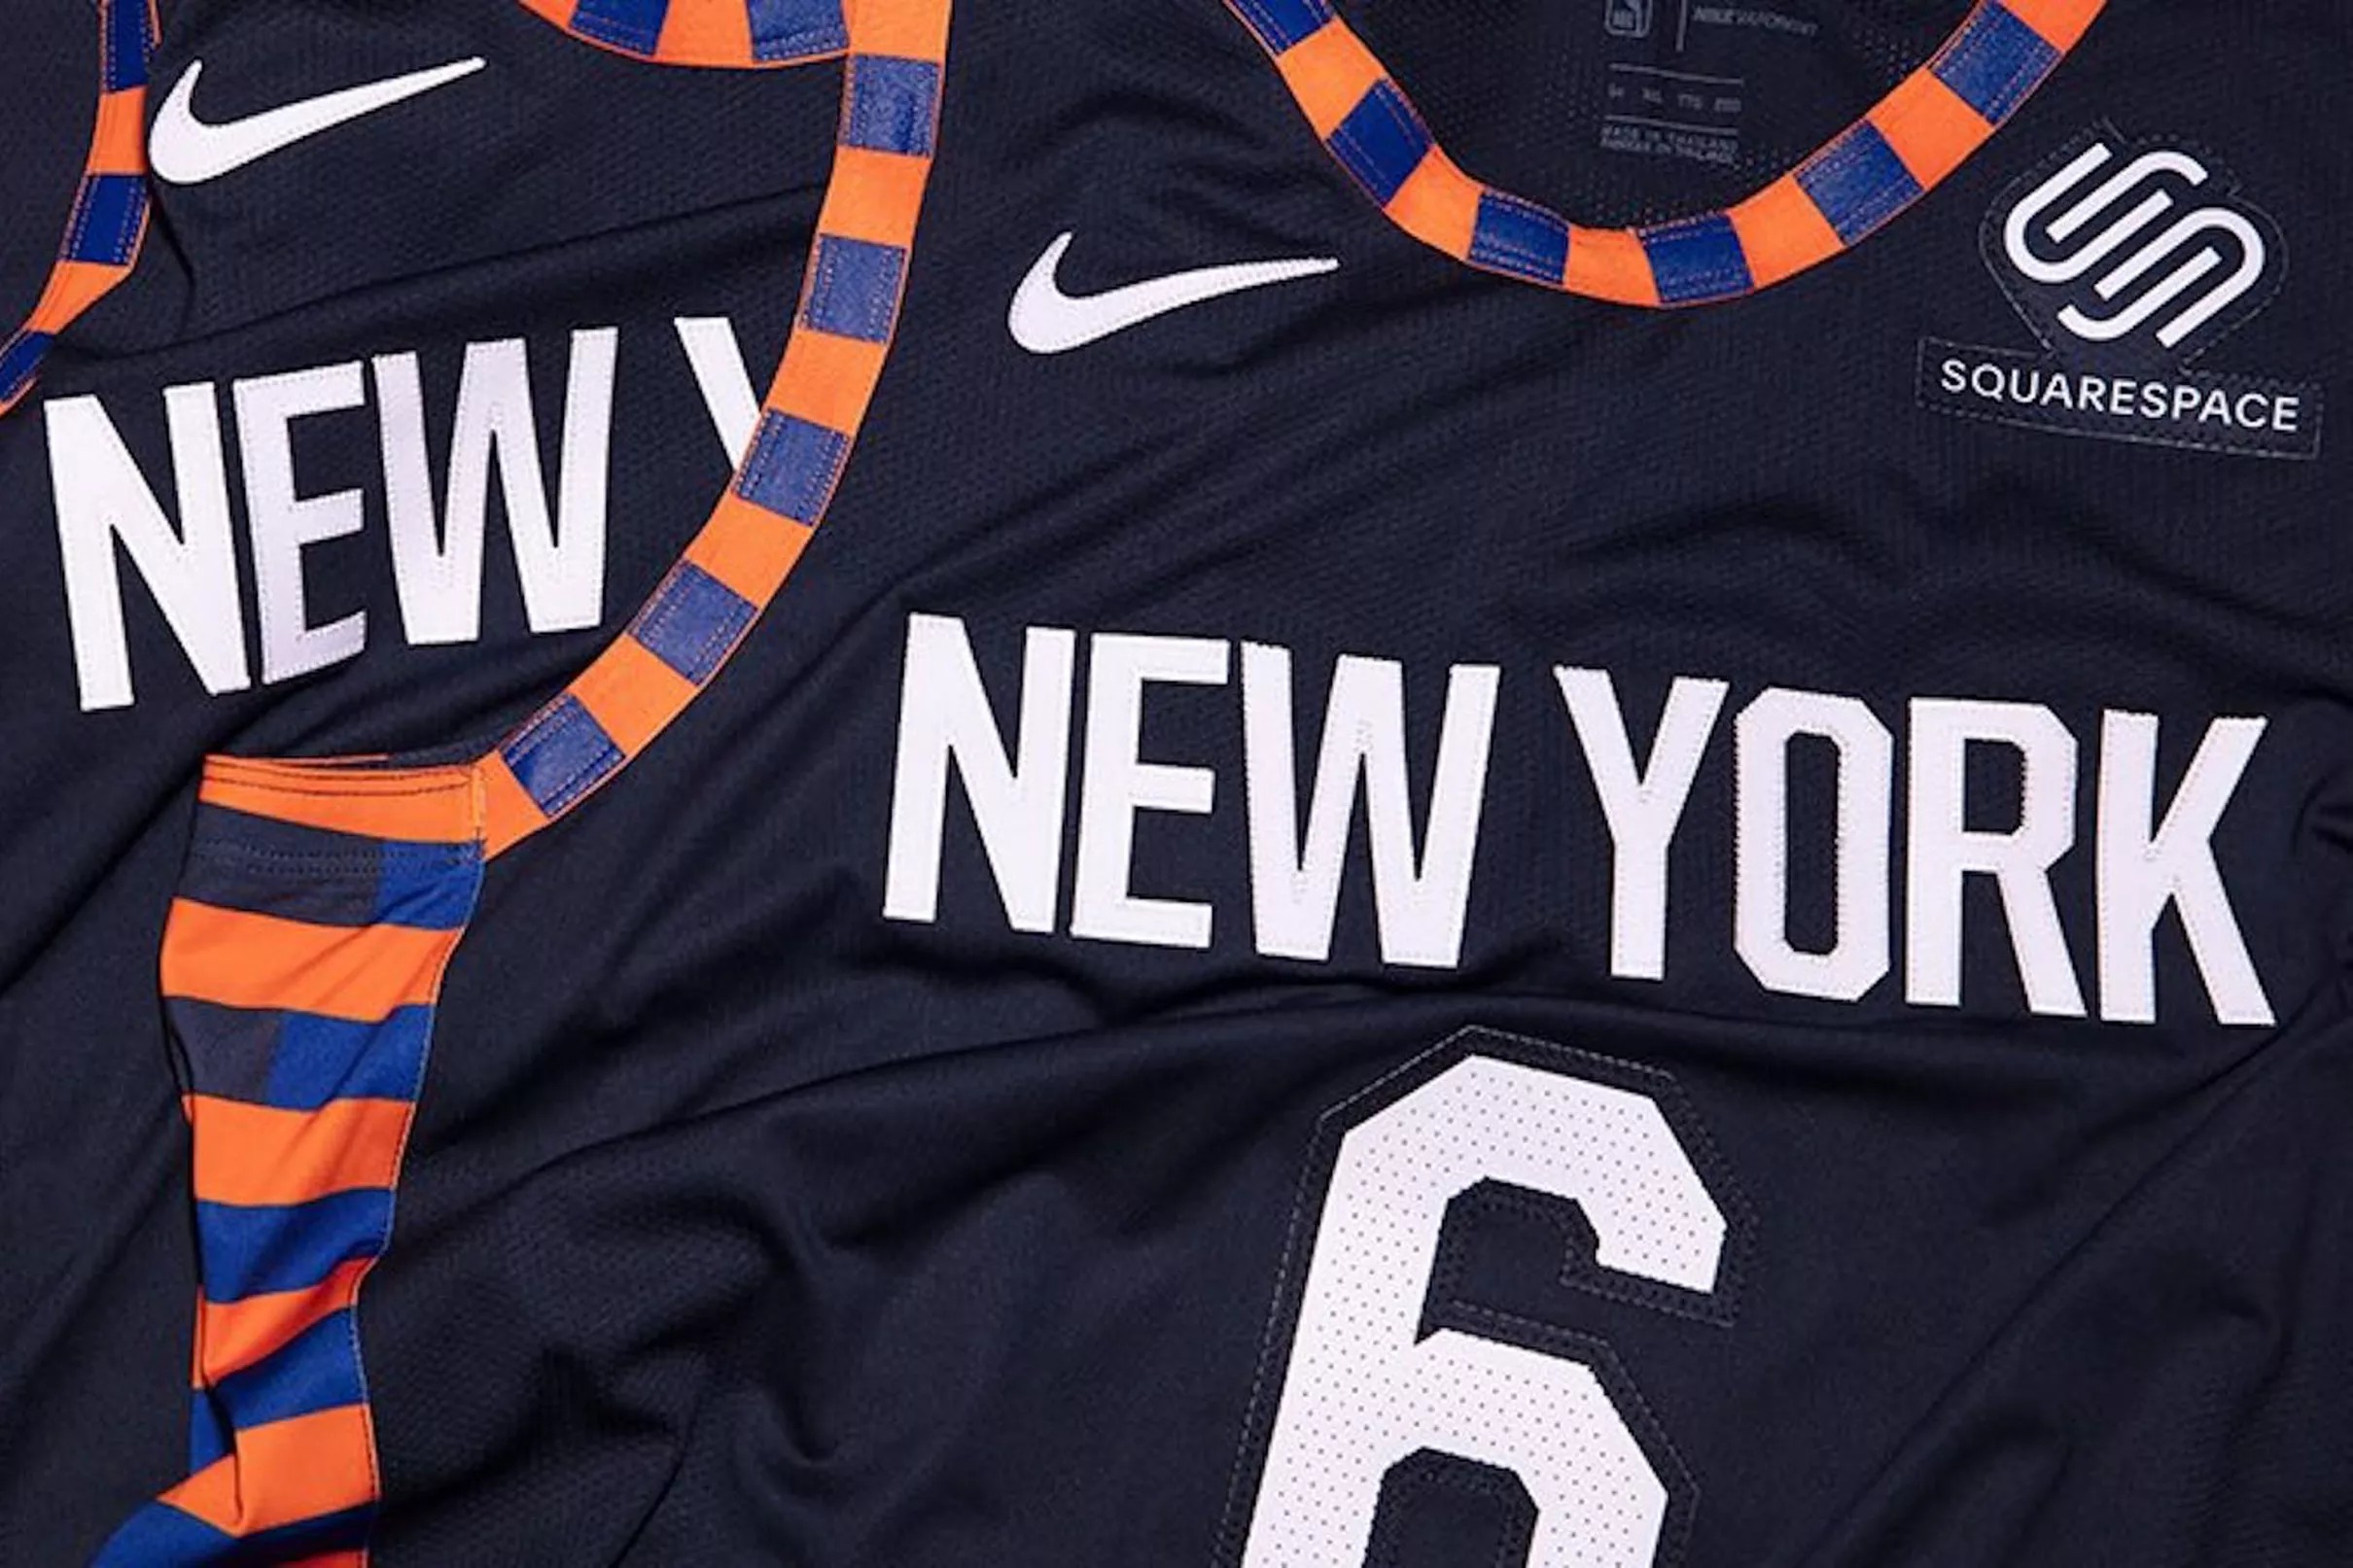 The 201819 Knicks City Edition Uniforms are Here!